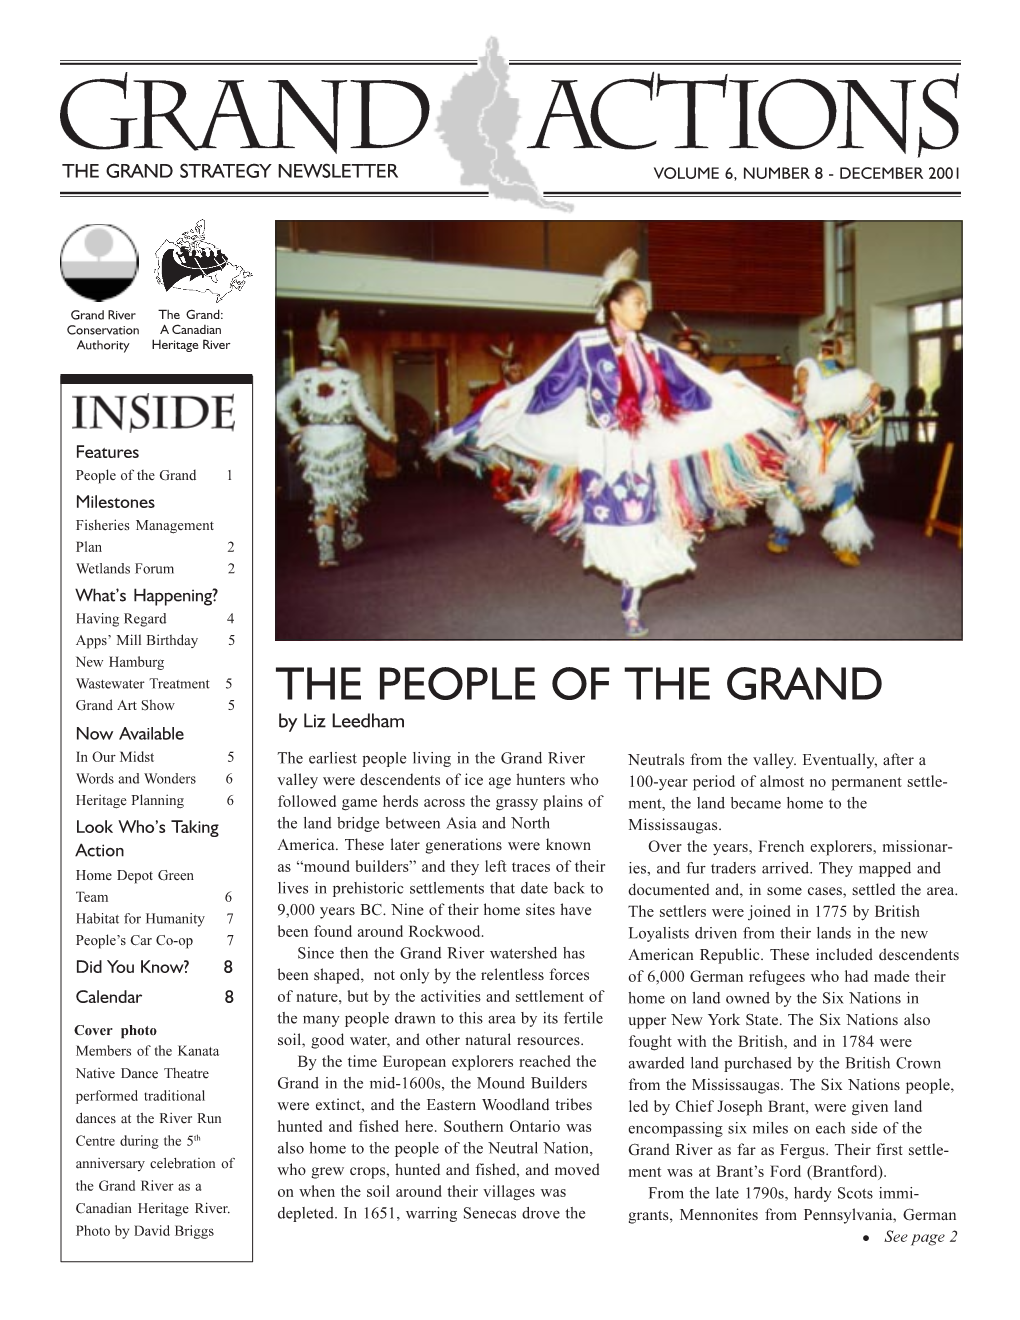 THE PEOPLE of the GRAND Grand Art Show 5 by Liz Leedham Now Available in Our Midst 5 the Earliest People Living in the Grand River Neutrals from the Valley